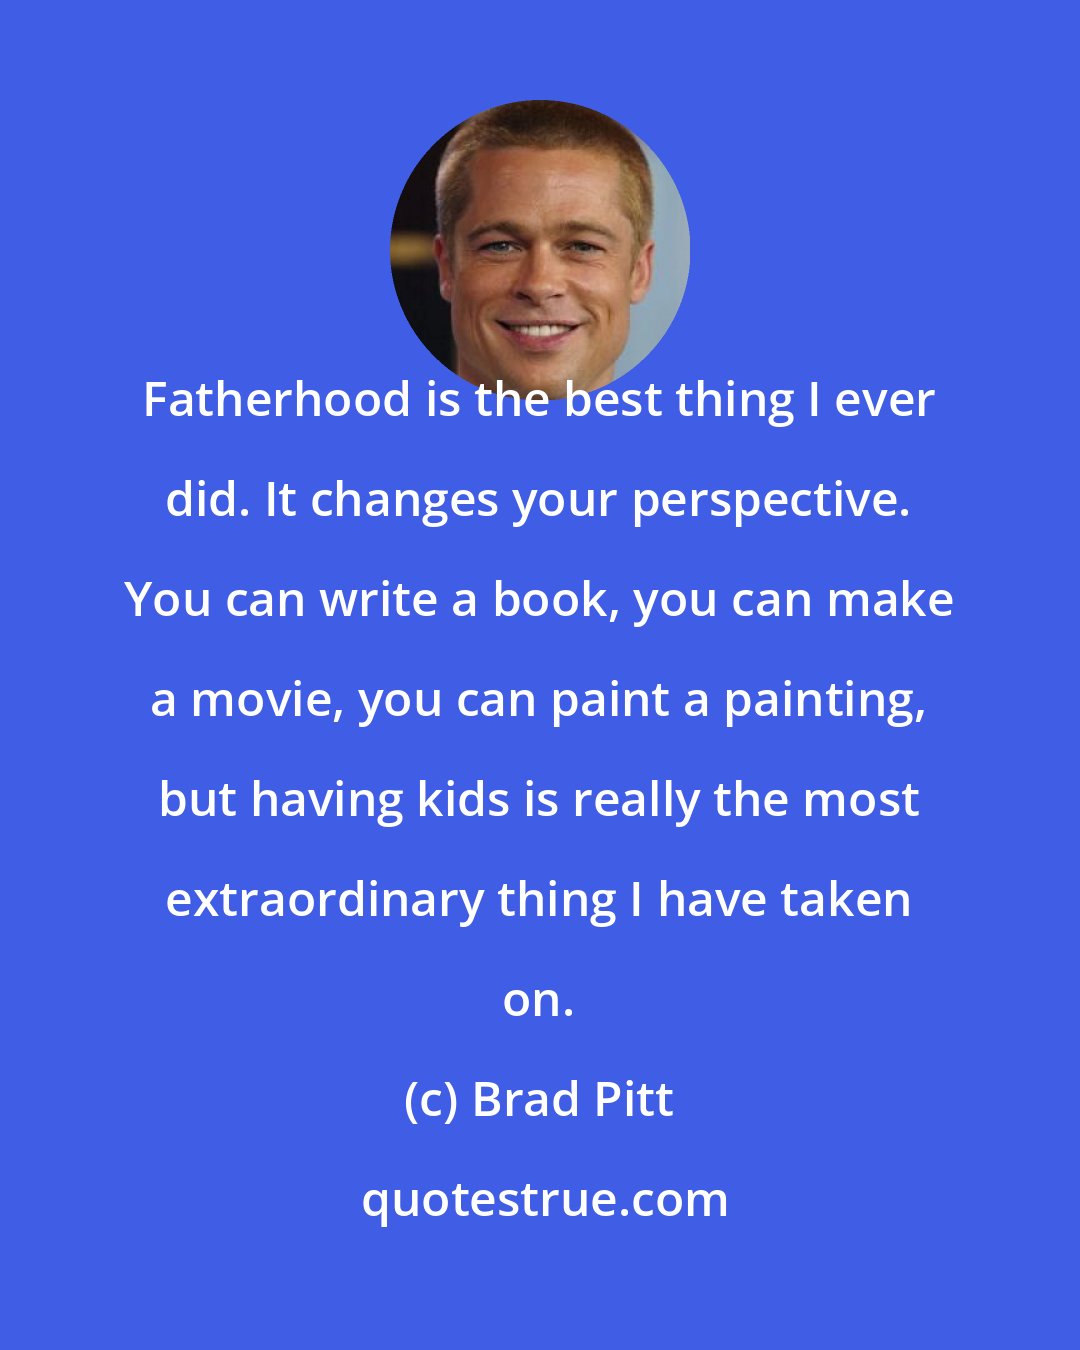 Brad Pitt: Fatherhood is the best thing I ever did. It changes your perspective. You can write a book, you can make a movie, you can paint a painting, but having kids is really the most extraordinary thing I have taken on.